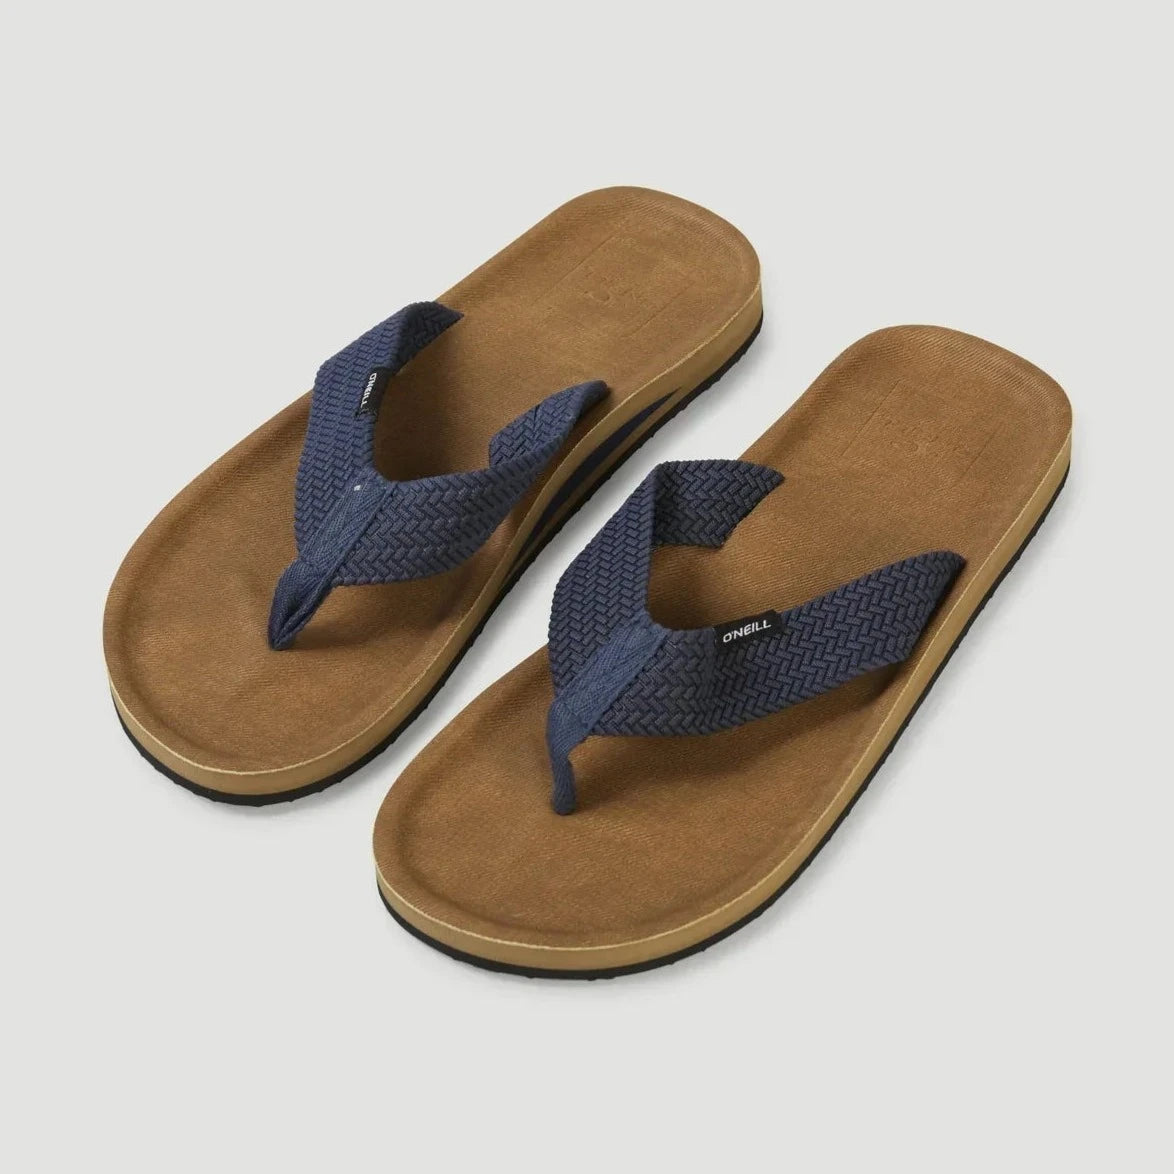 O'Neill Chad Sandals